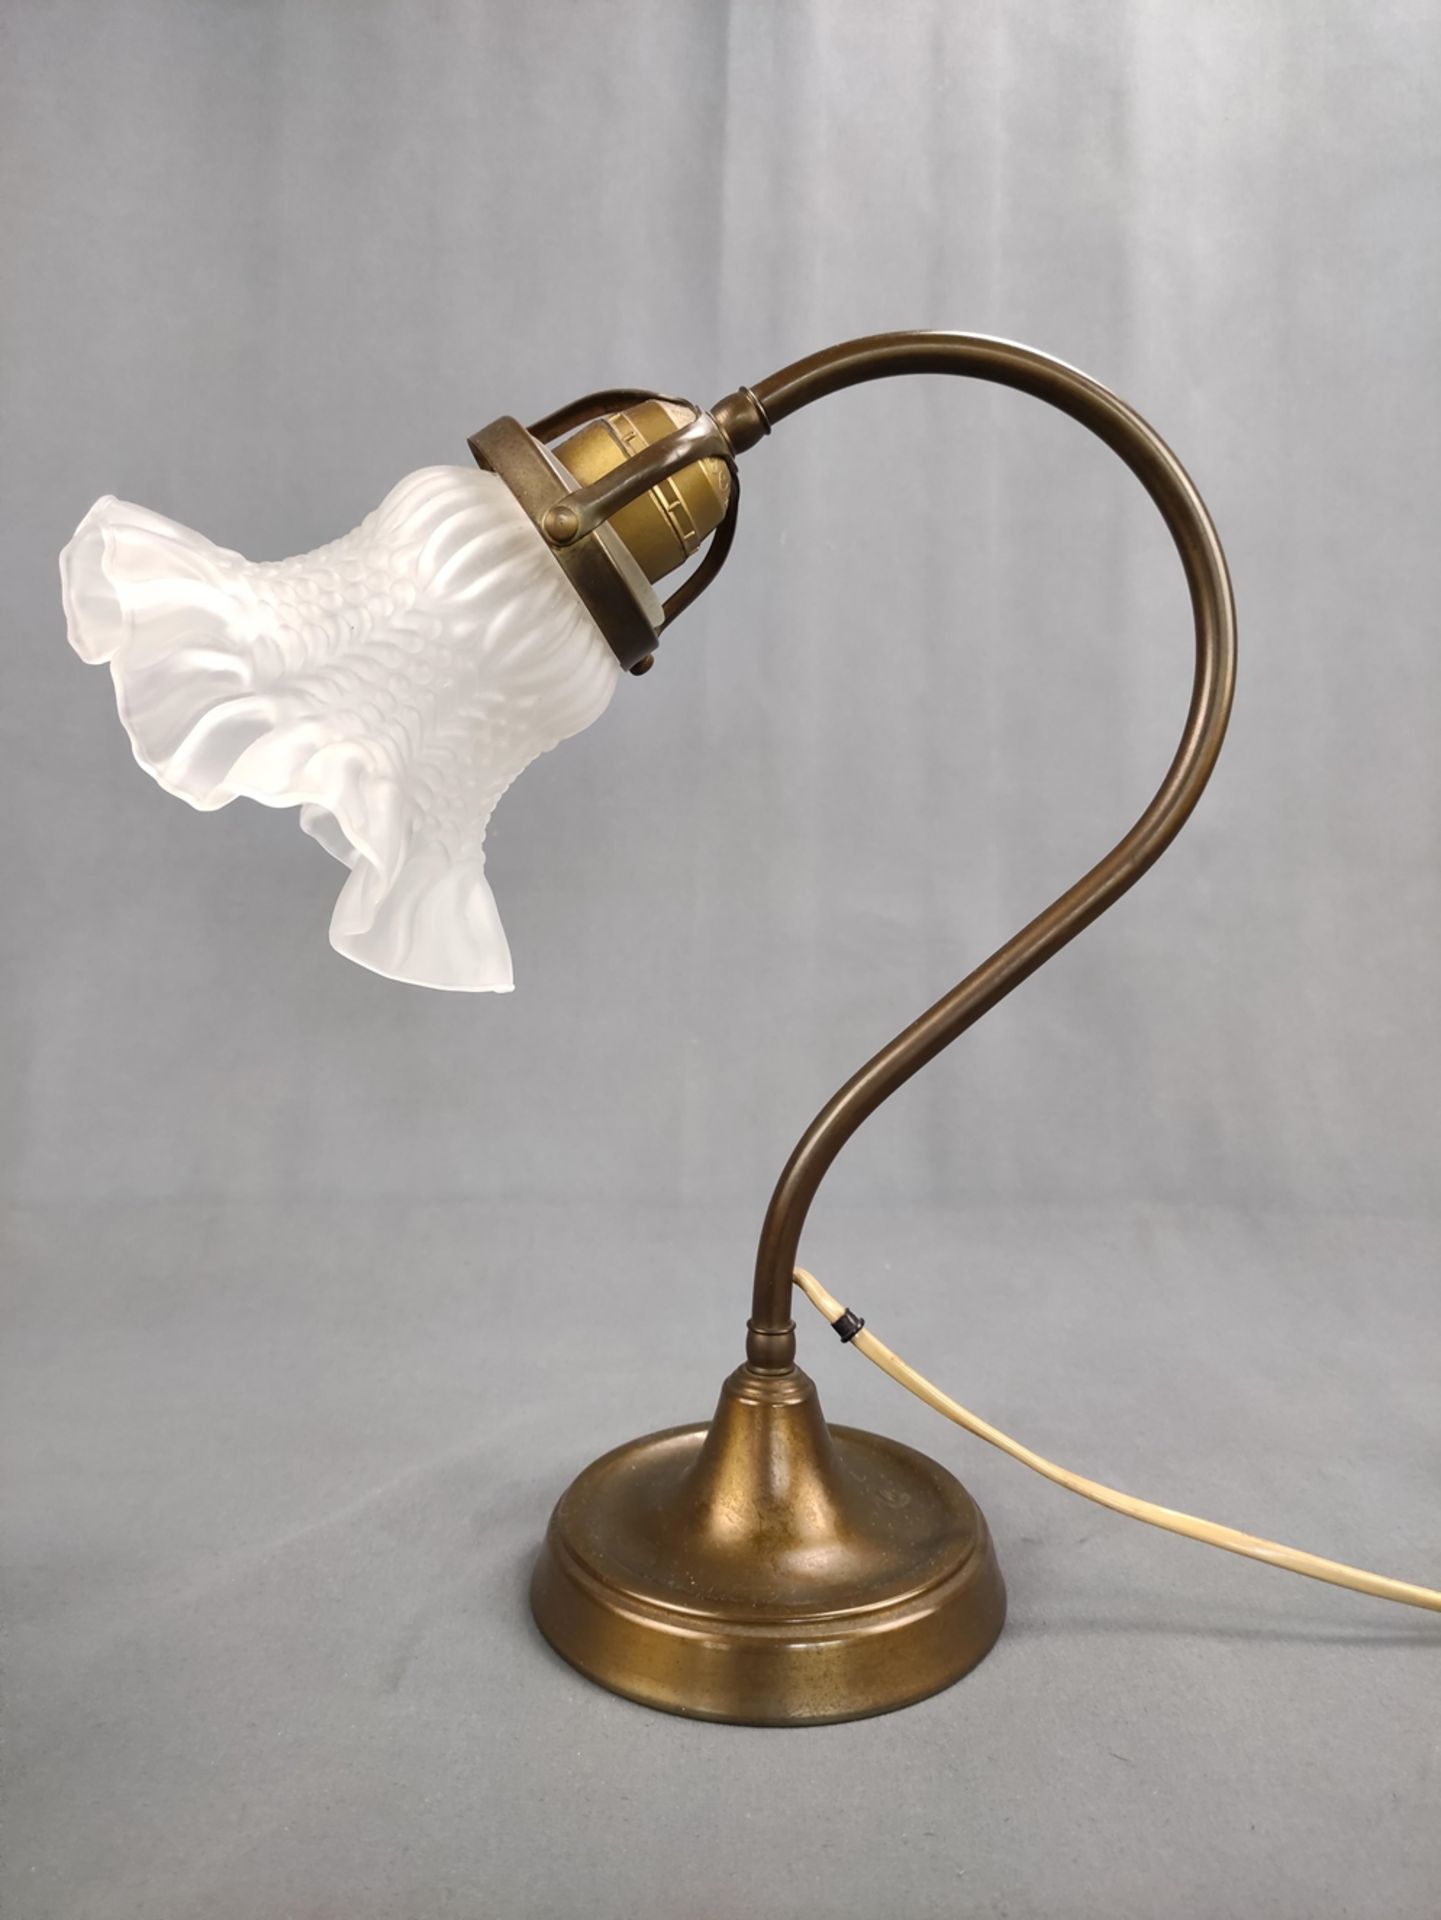 Elegant table lamp, round base with curved lamp foot, opaque glass shade shaped as a flower, brass/